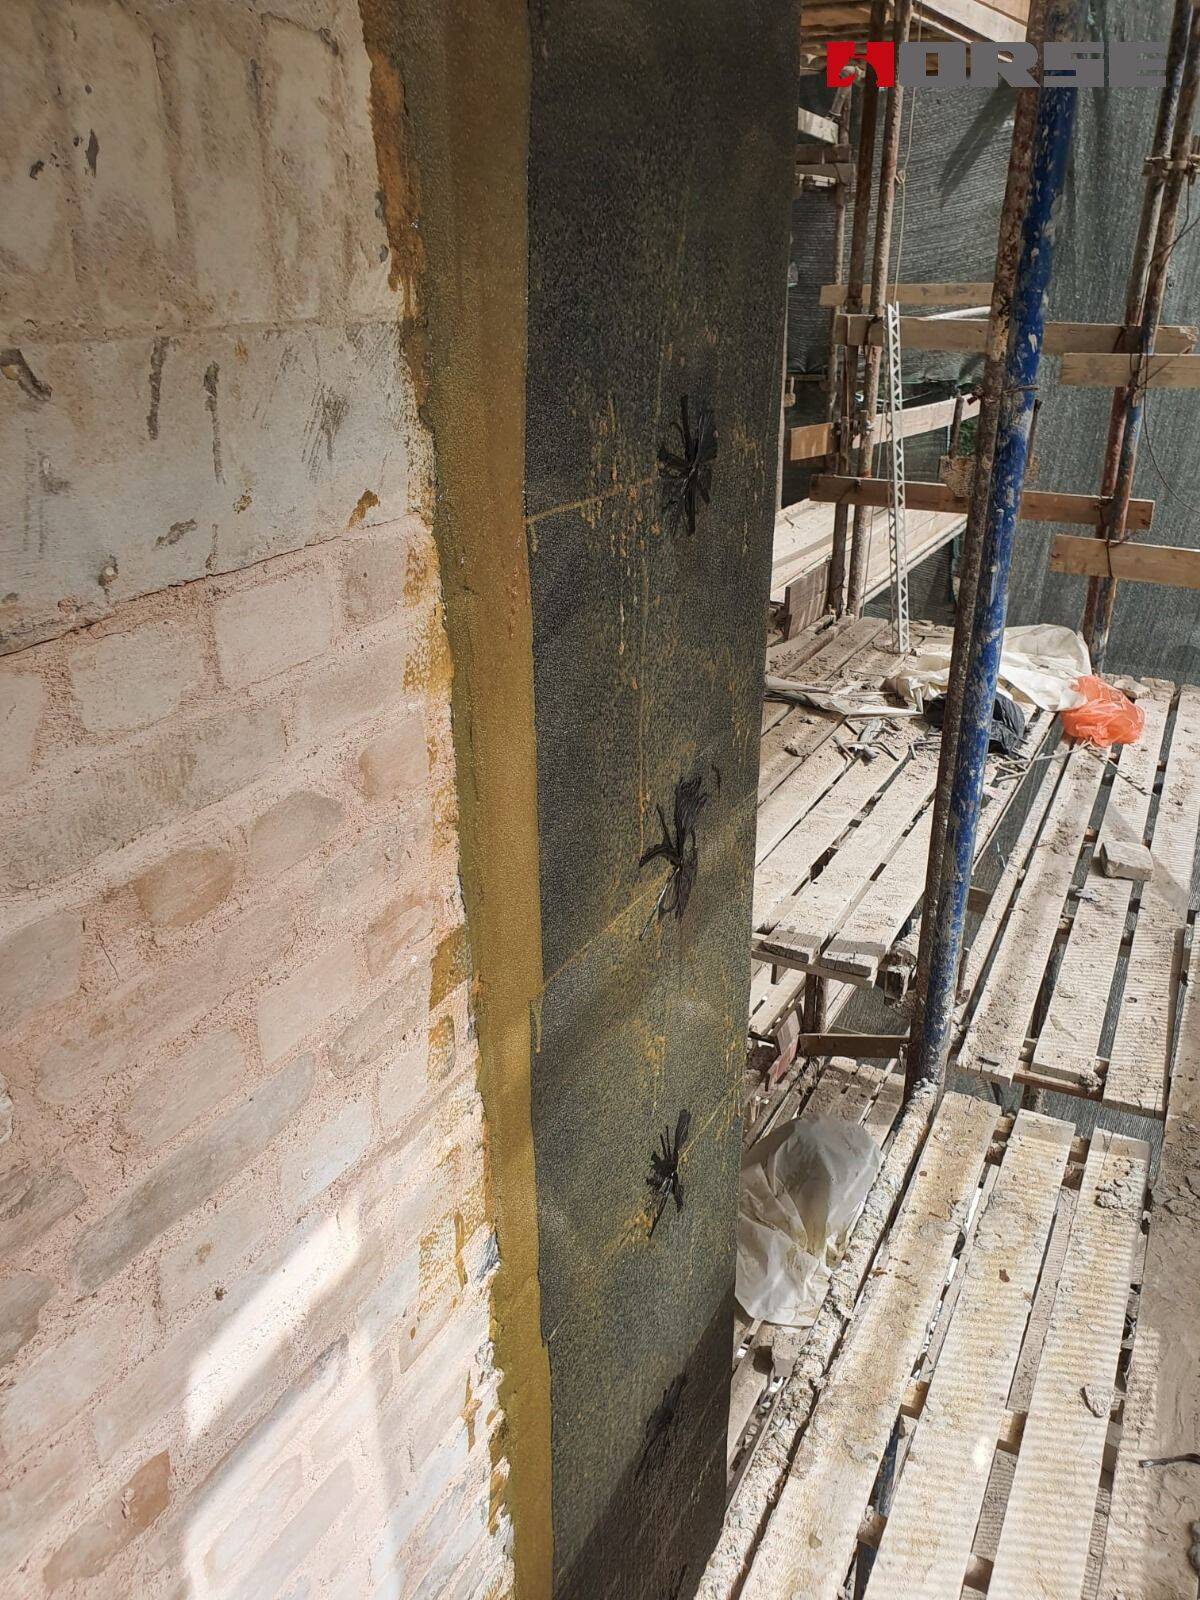 Wall Structural Retrofitting with CFRP And Carbon Fiber Anchor